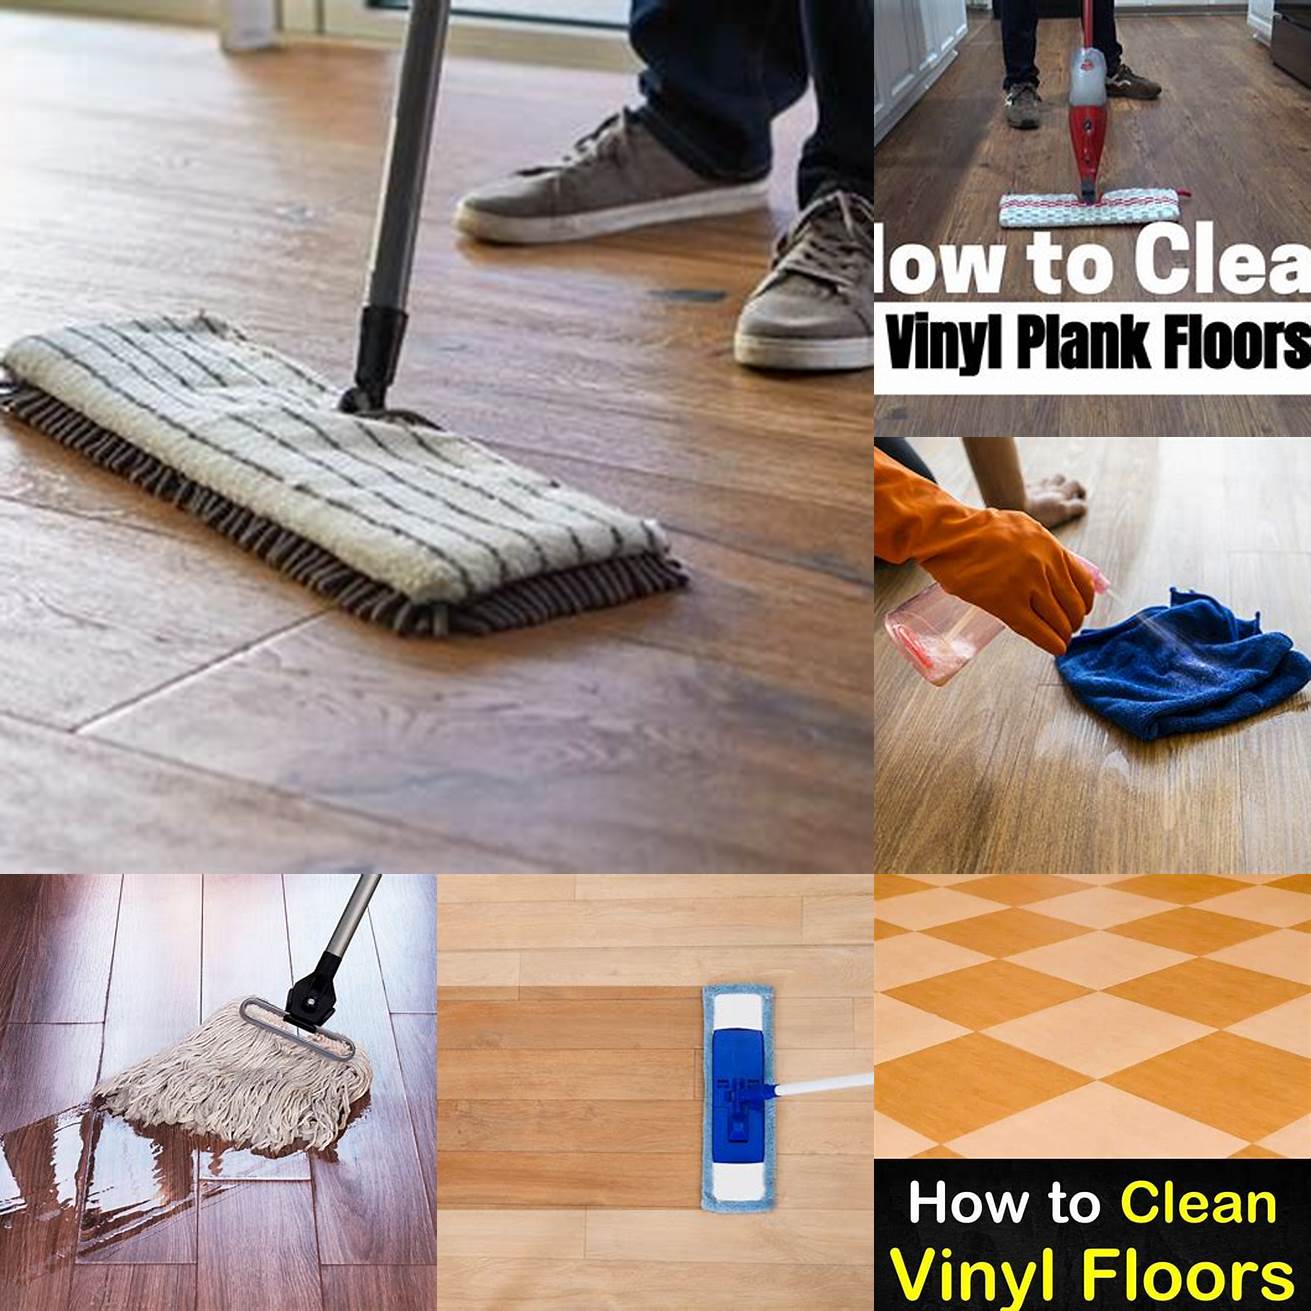 Easy to clean Vinyl floors are low maintenance and easy to clean You can use a damp mop broom or vacuum to remove dirt and debris Vinyl floors do not require special cleaners making them a budget-friendly option